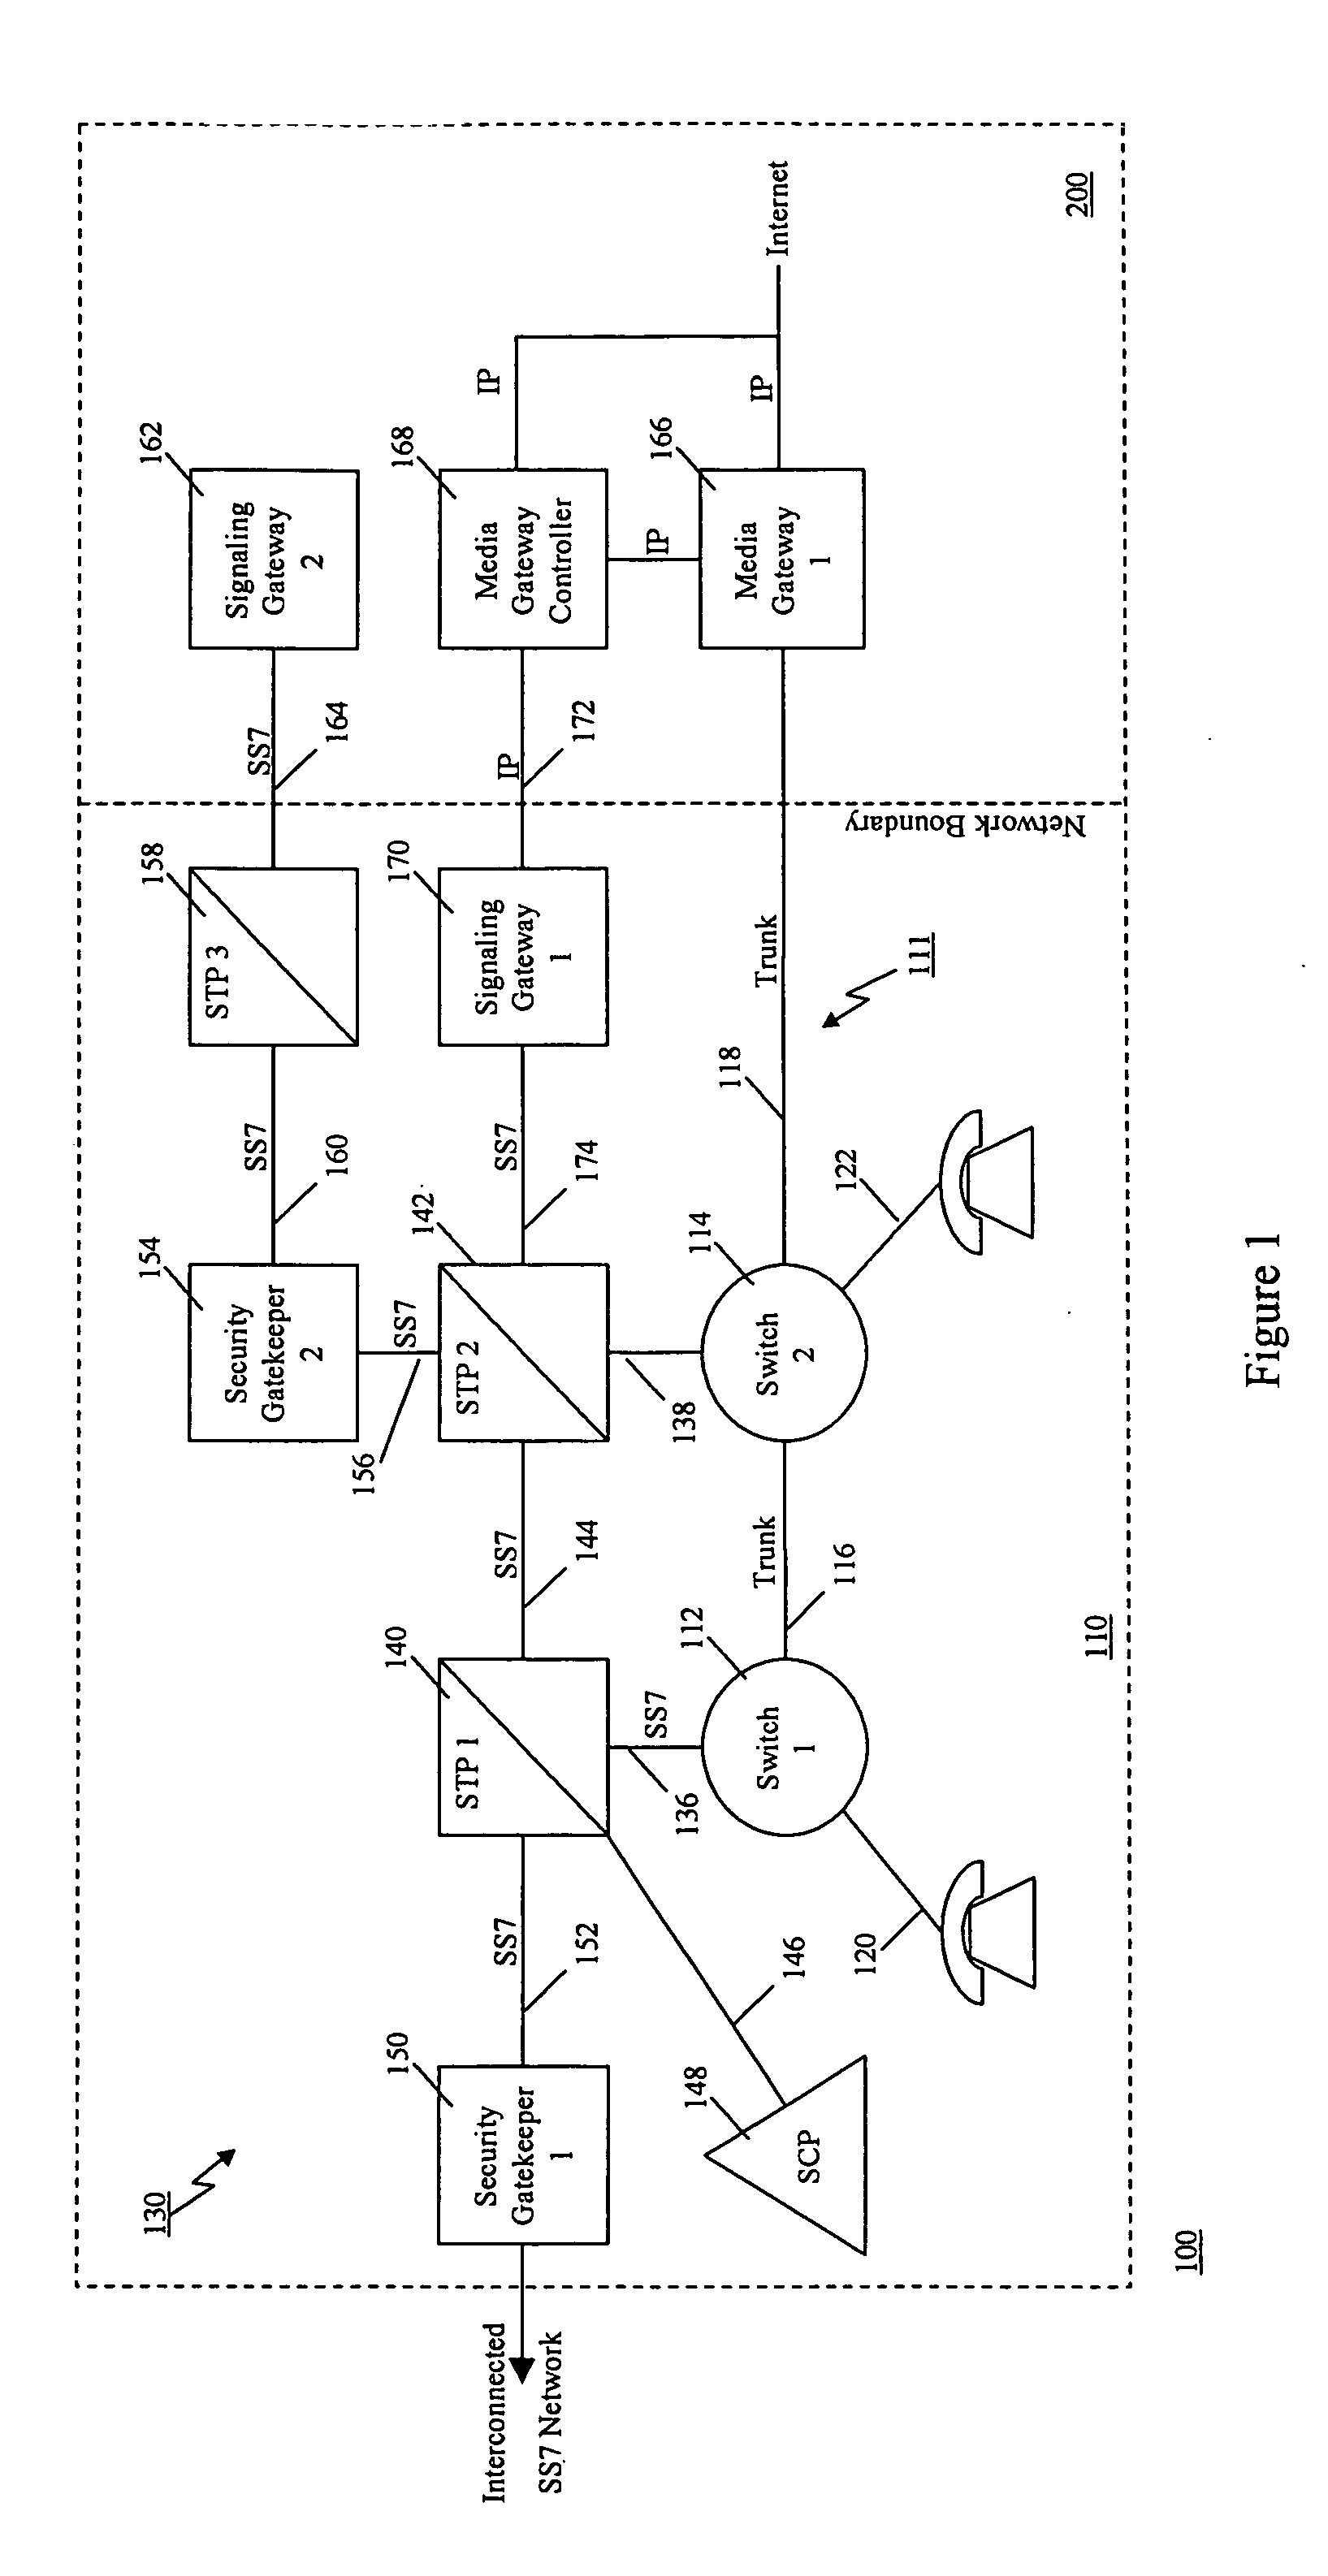 Method of and apparatus for authenticating control messages in a signaling network